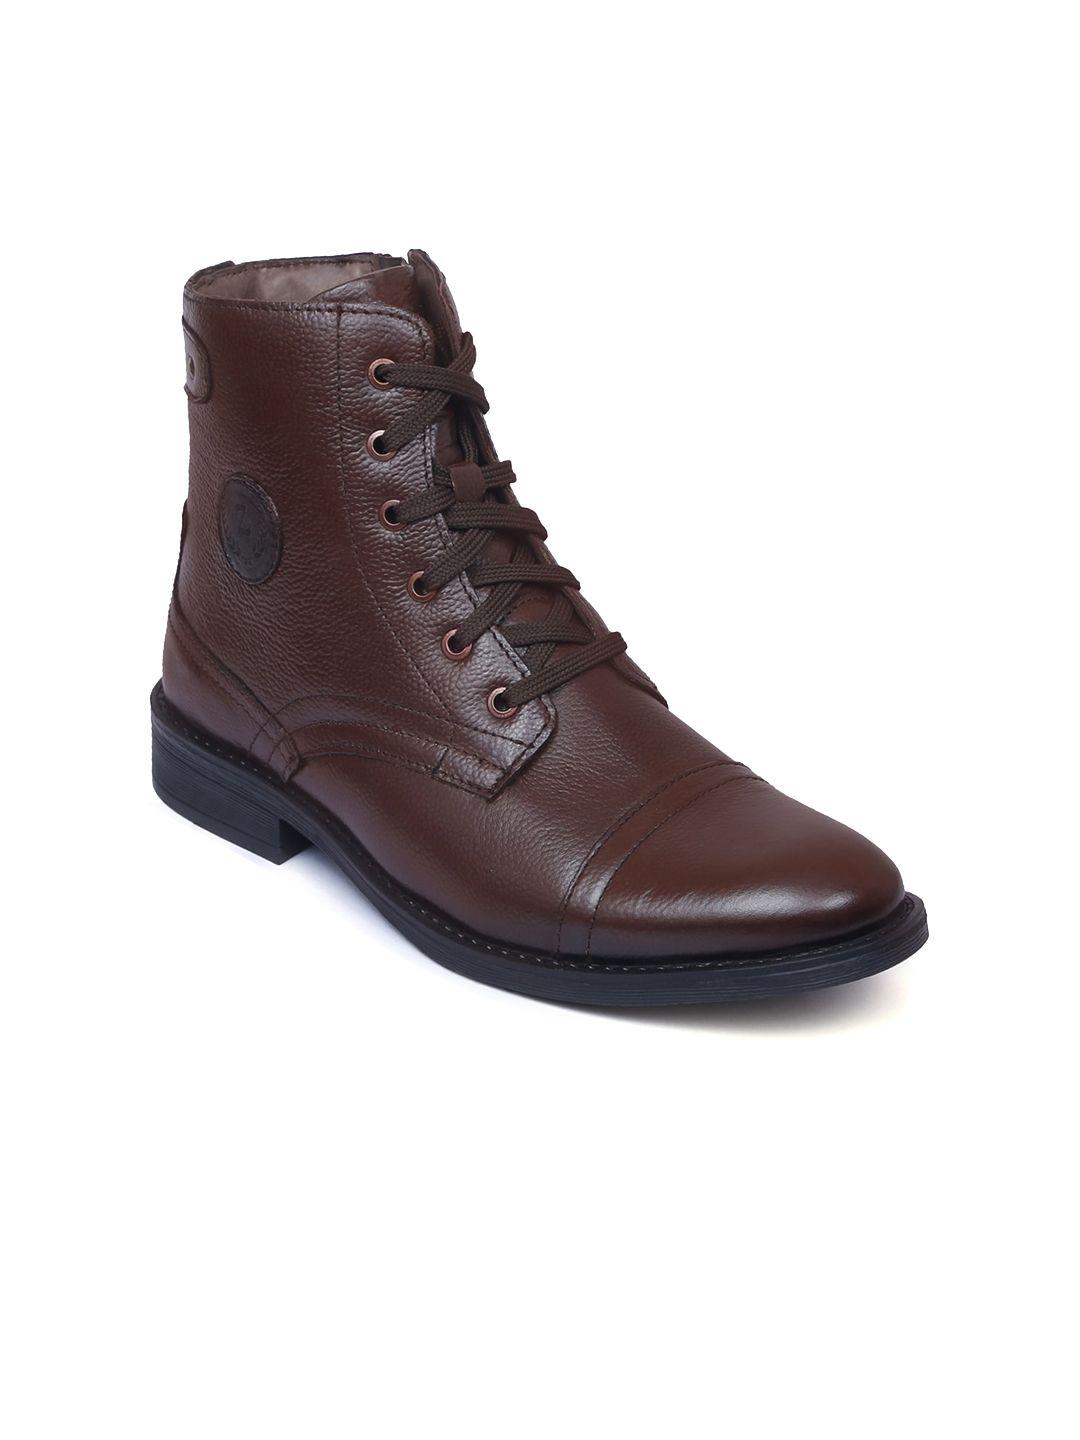 zoom shoes men brown  solid leather regular boots